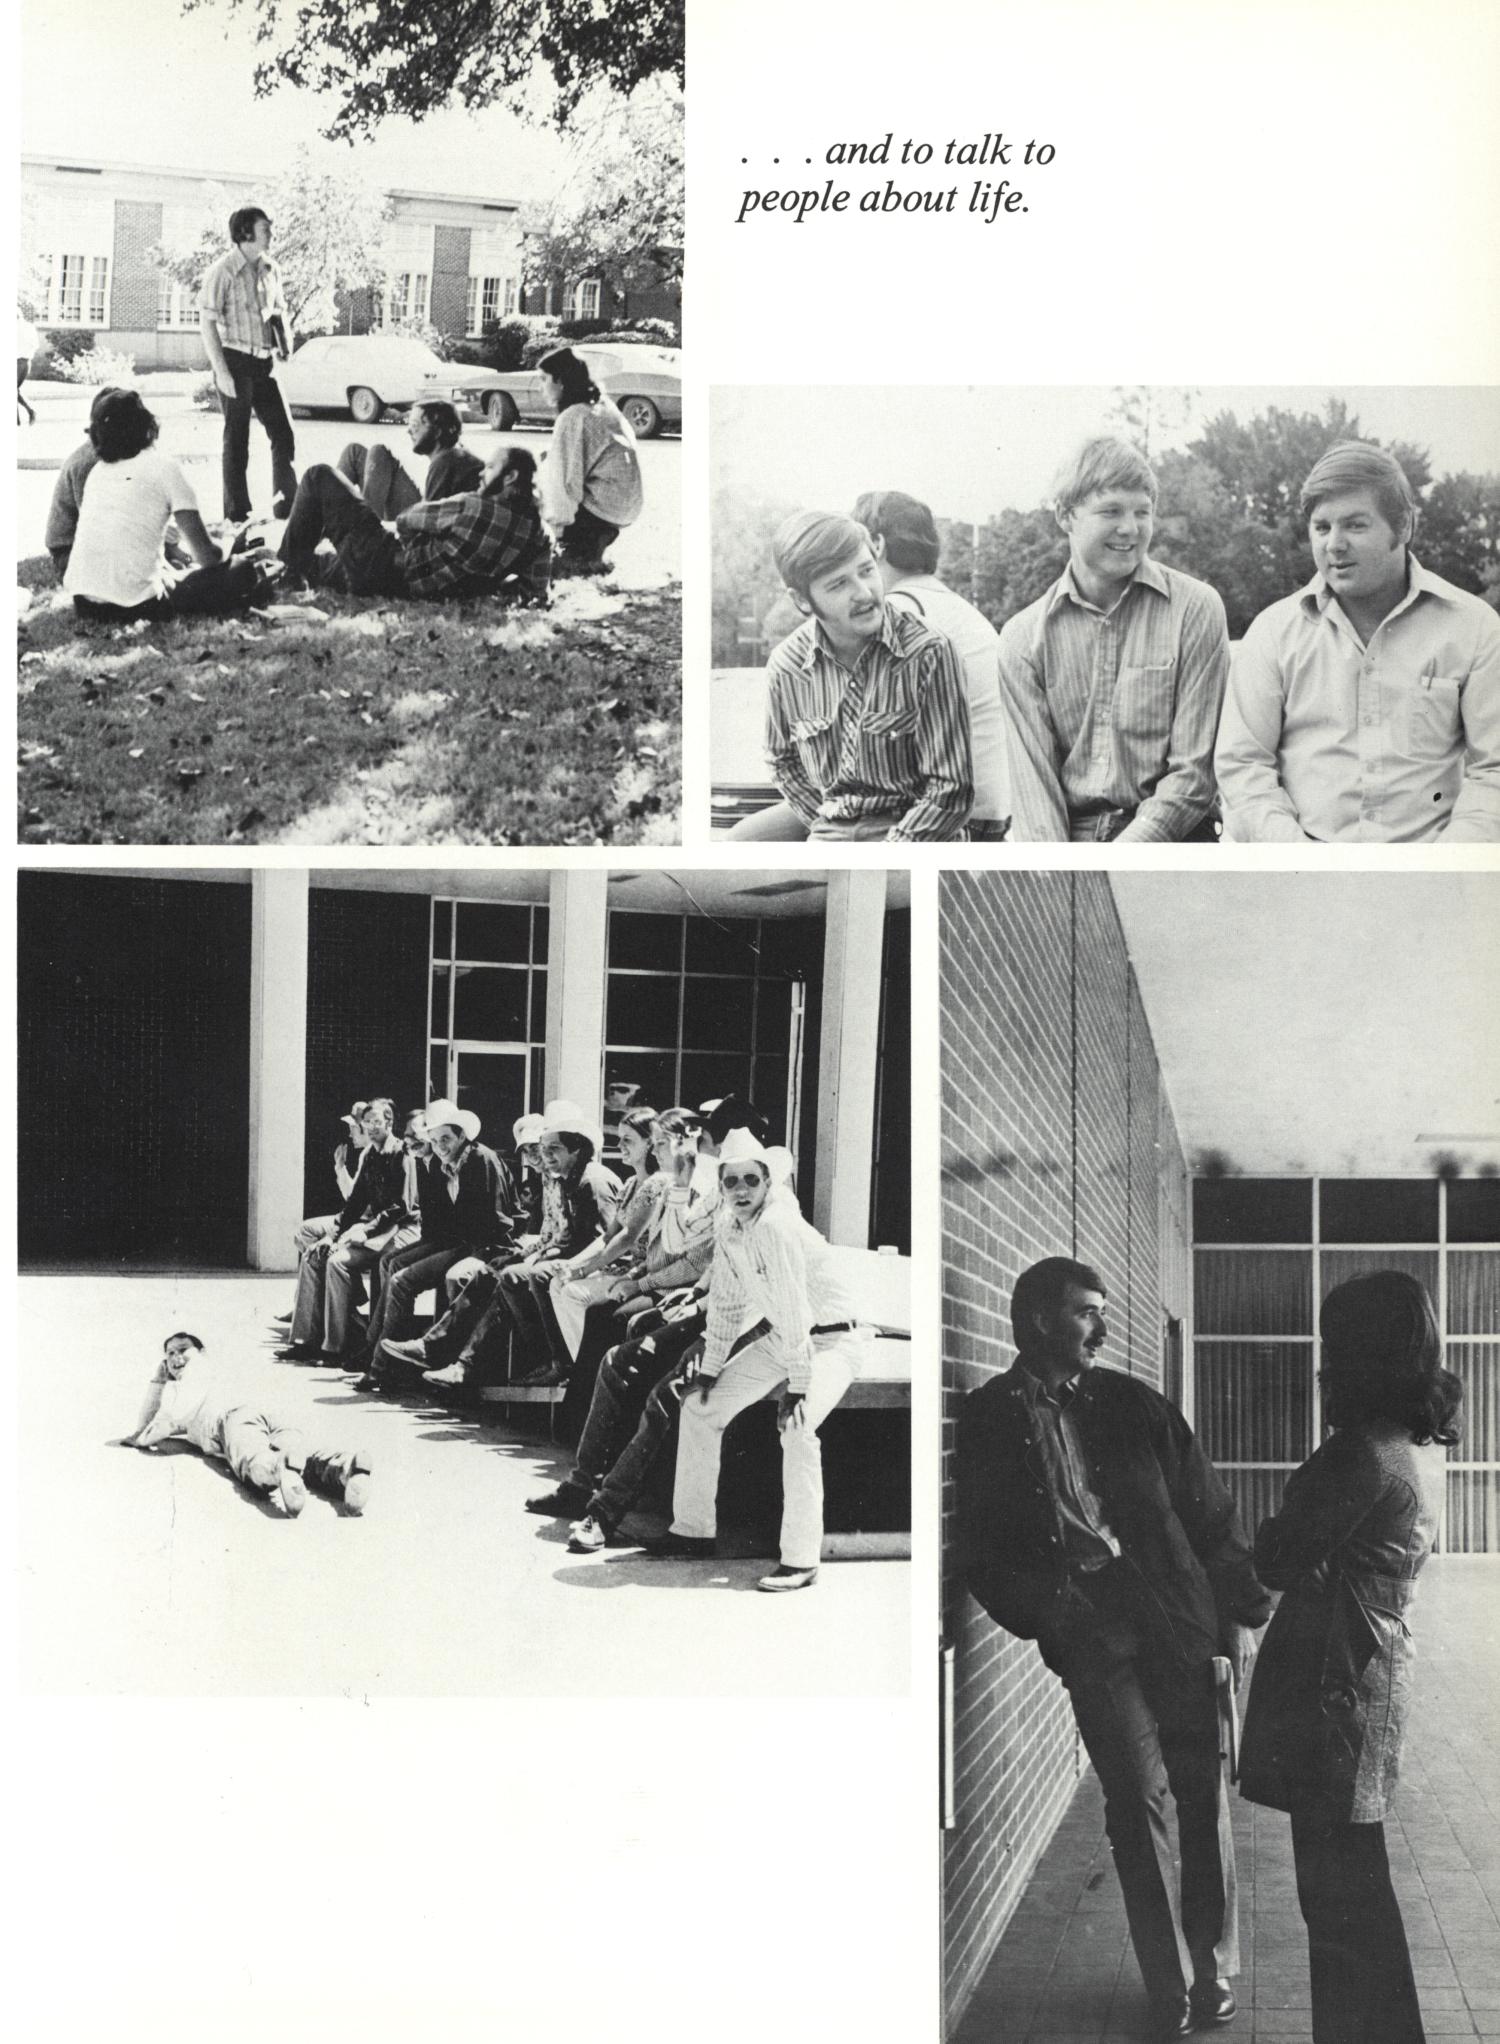 The Grassburr, Yearbook of Tarleton State College, 1973
                                                
                                                    11
                                                